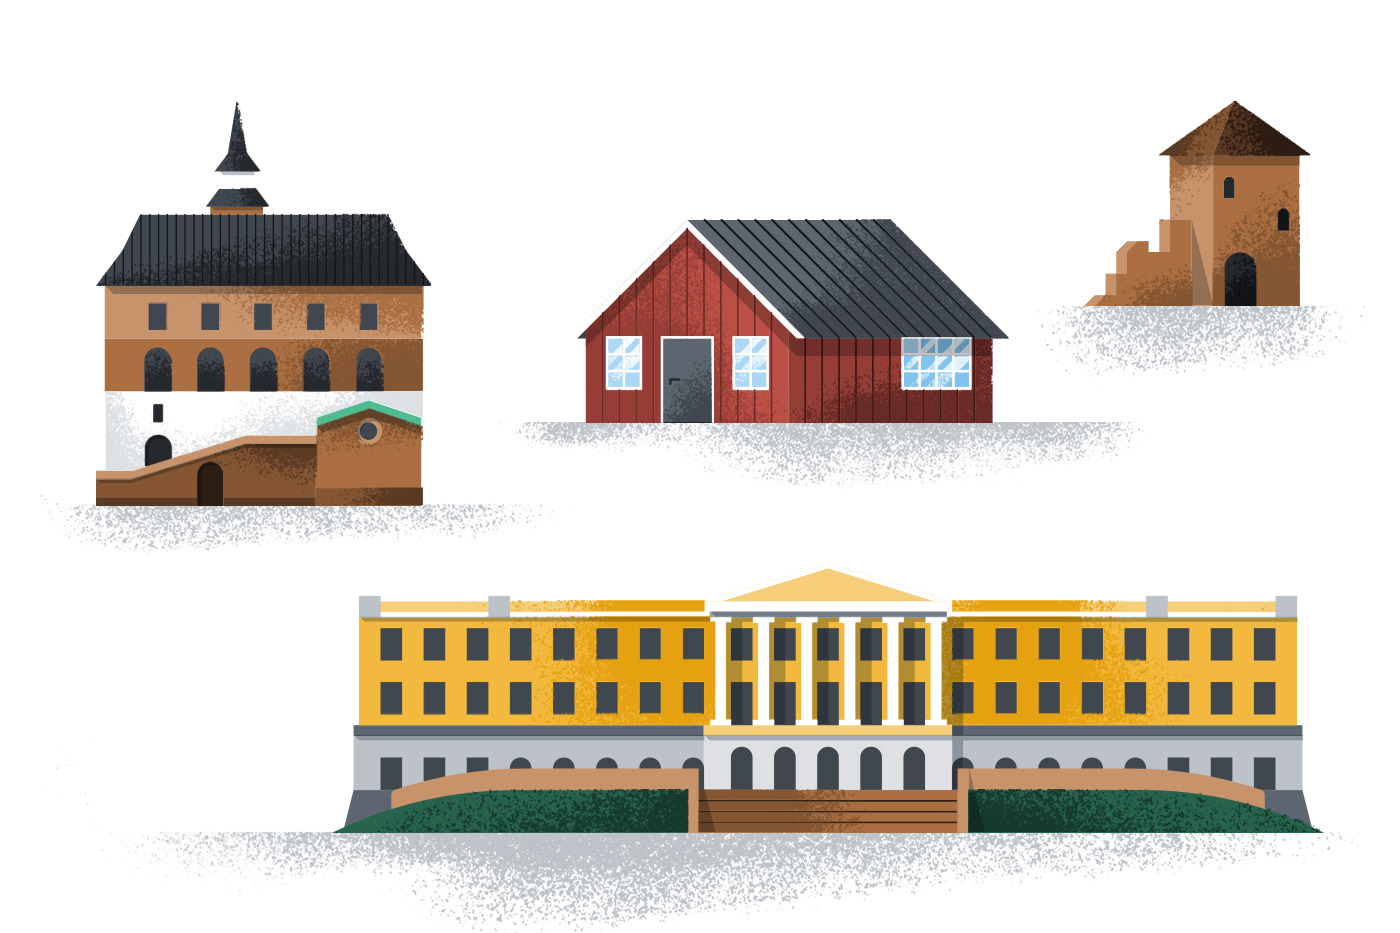 Illustrated icons of the castle, scandinavian house, and the king’s palace by Adrian Bauer